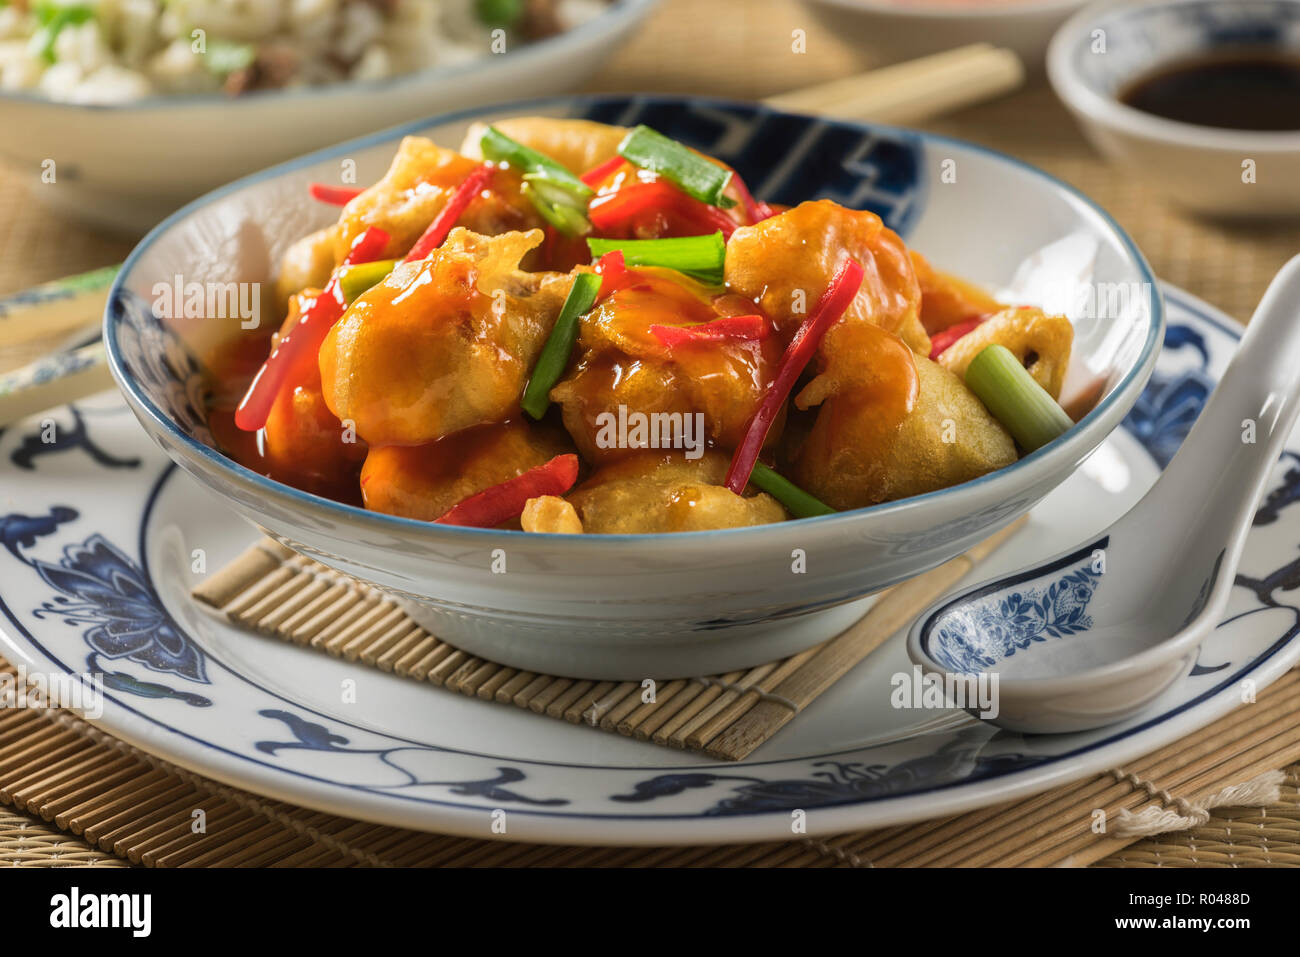 Sweet and sour pork. Chinese food Stock Photo